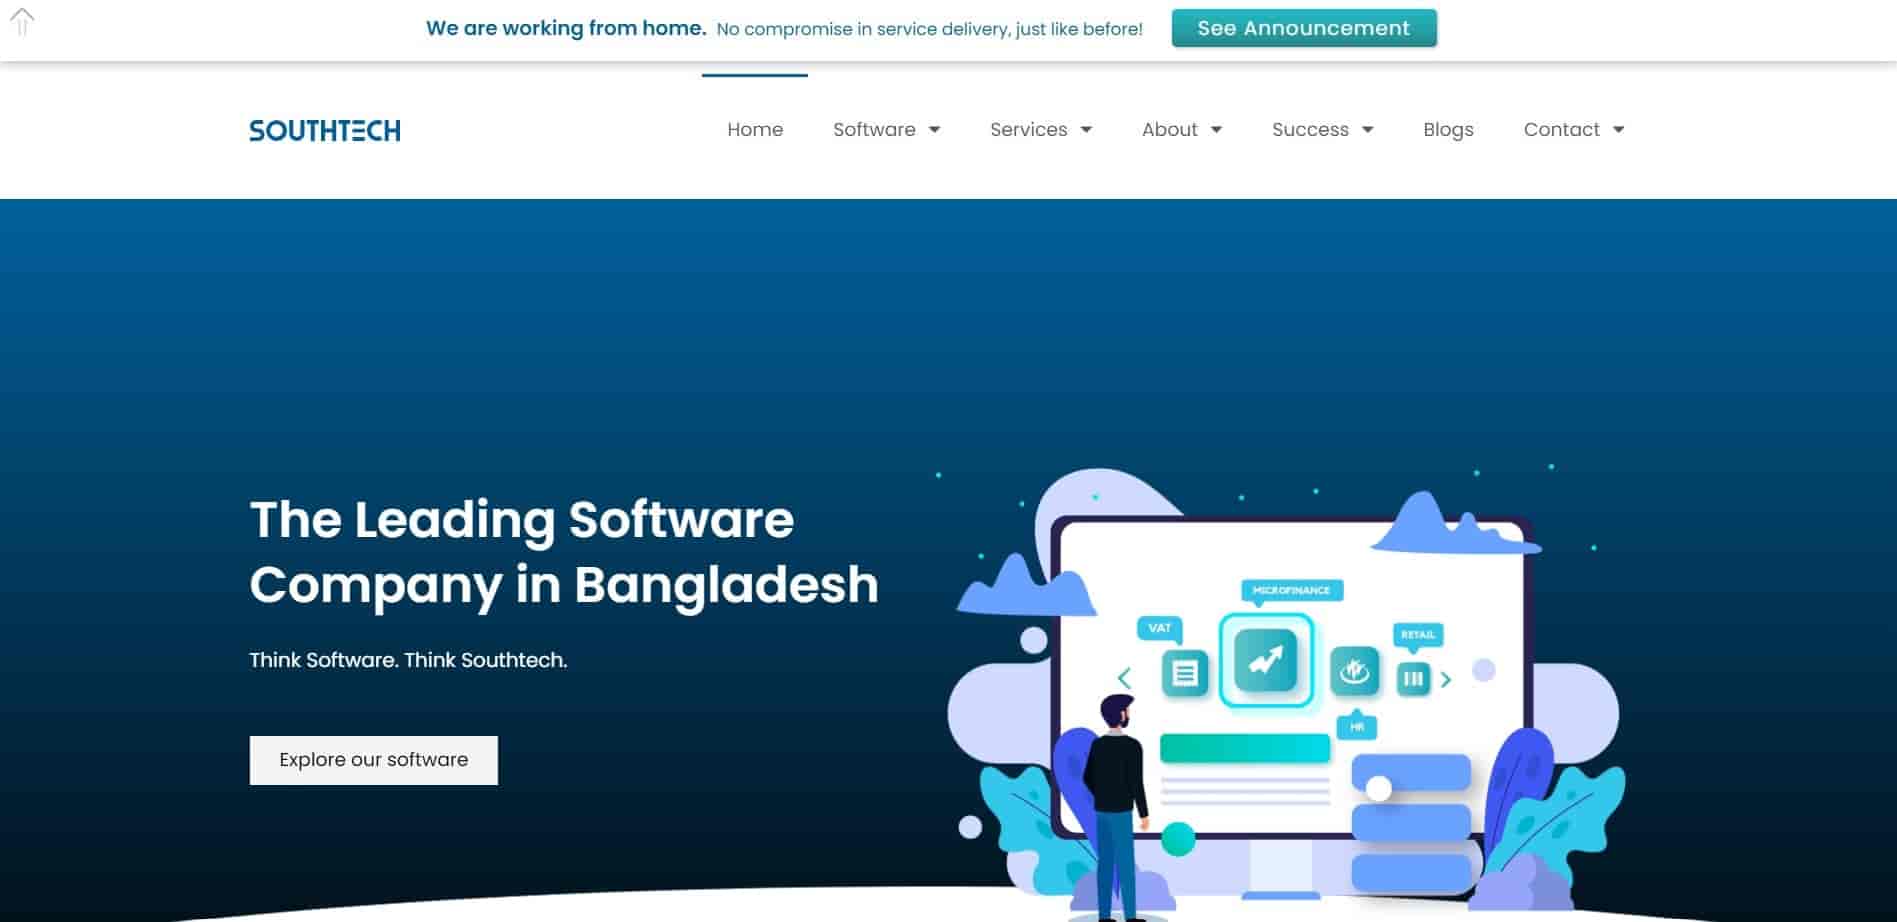 SouthTech homepage where it says the leading software company in Bangladesh and also mentions options to explore their software.